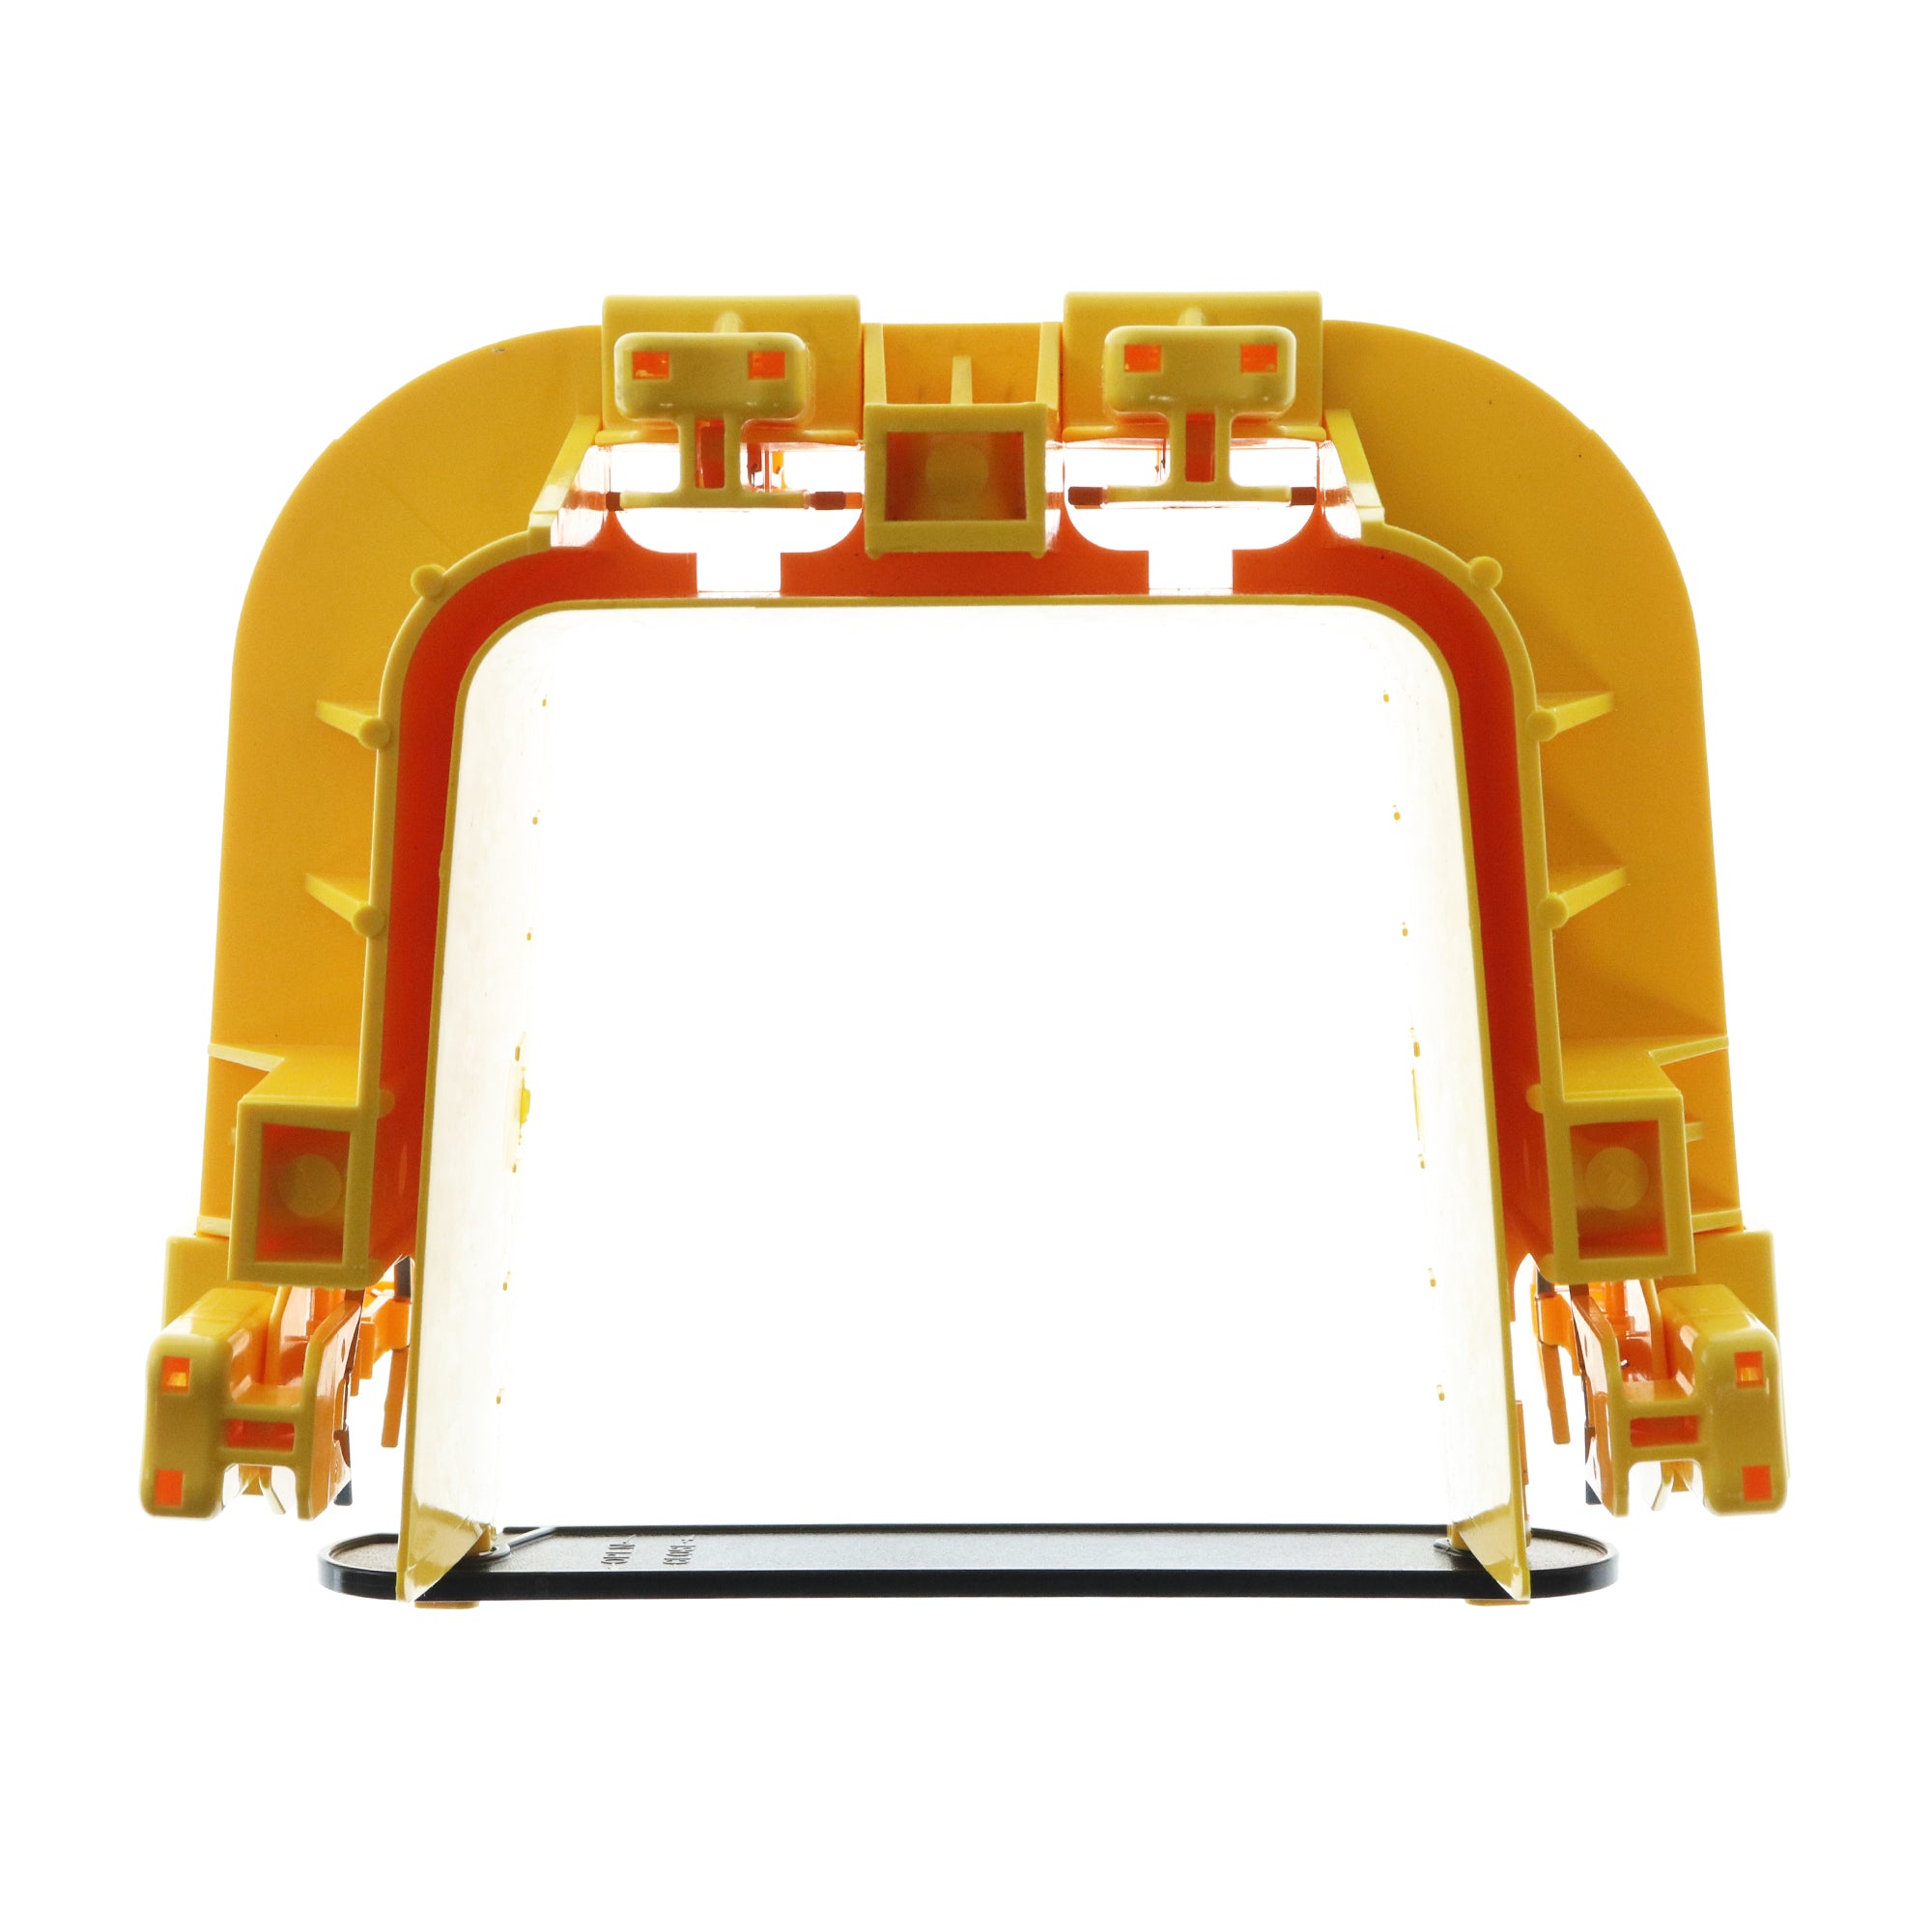 ADC, ADC COMMSCOPE FGS-MFAW-A FIBERGUIDE 4X4" SNAP-FIT RACEWAY JUNCTION, YELLOW